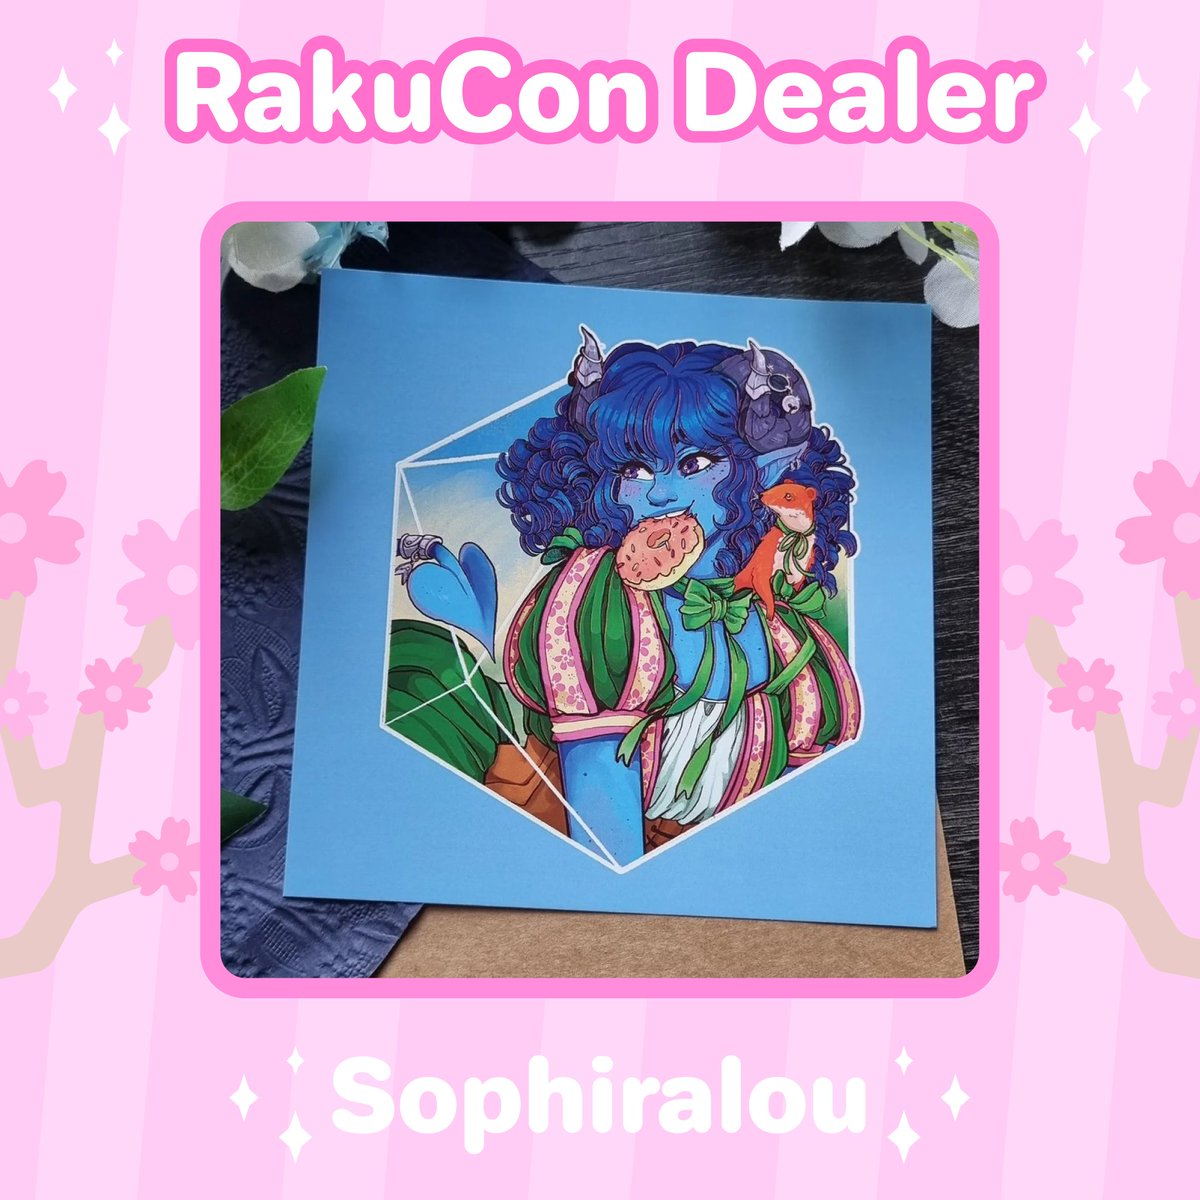 We're delighted to welcome back @sophiralou to RakuCon! 🌸 They sell a lovely range of wooden pins, prints, notepads, stickers and more! 💕